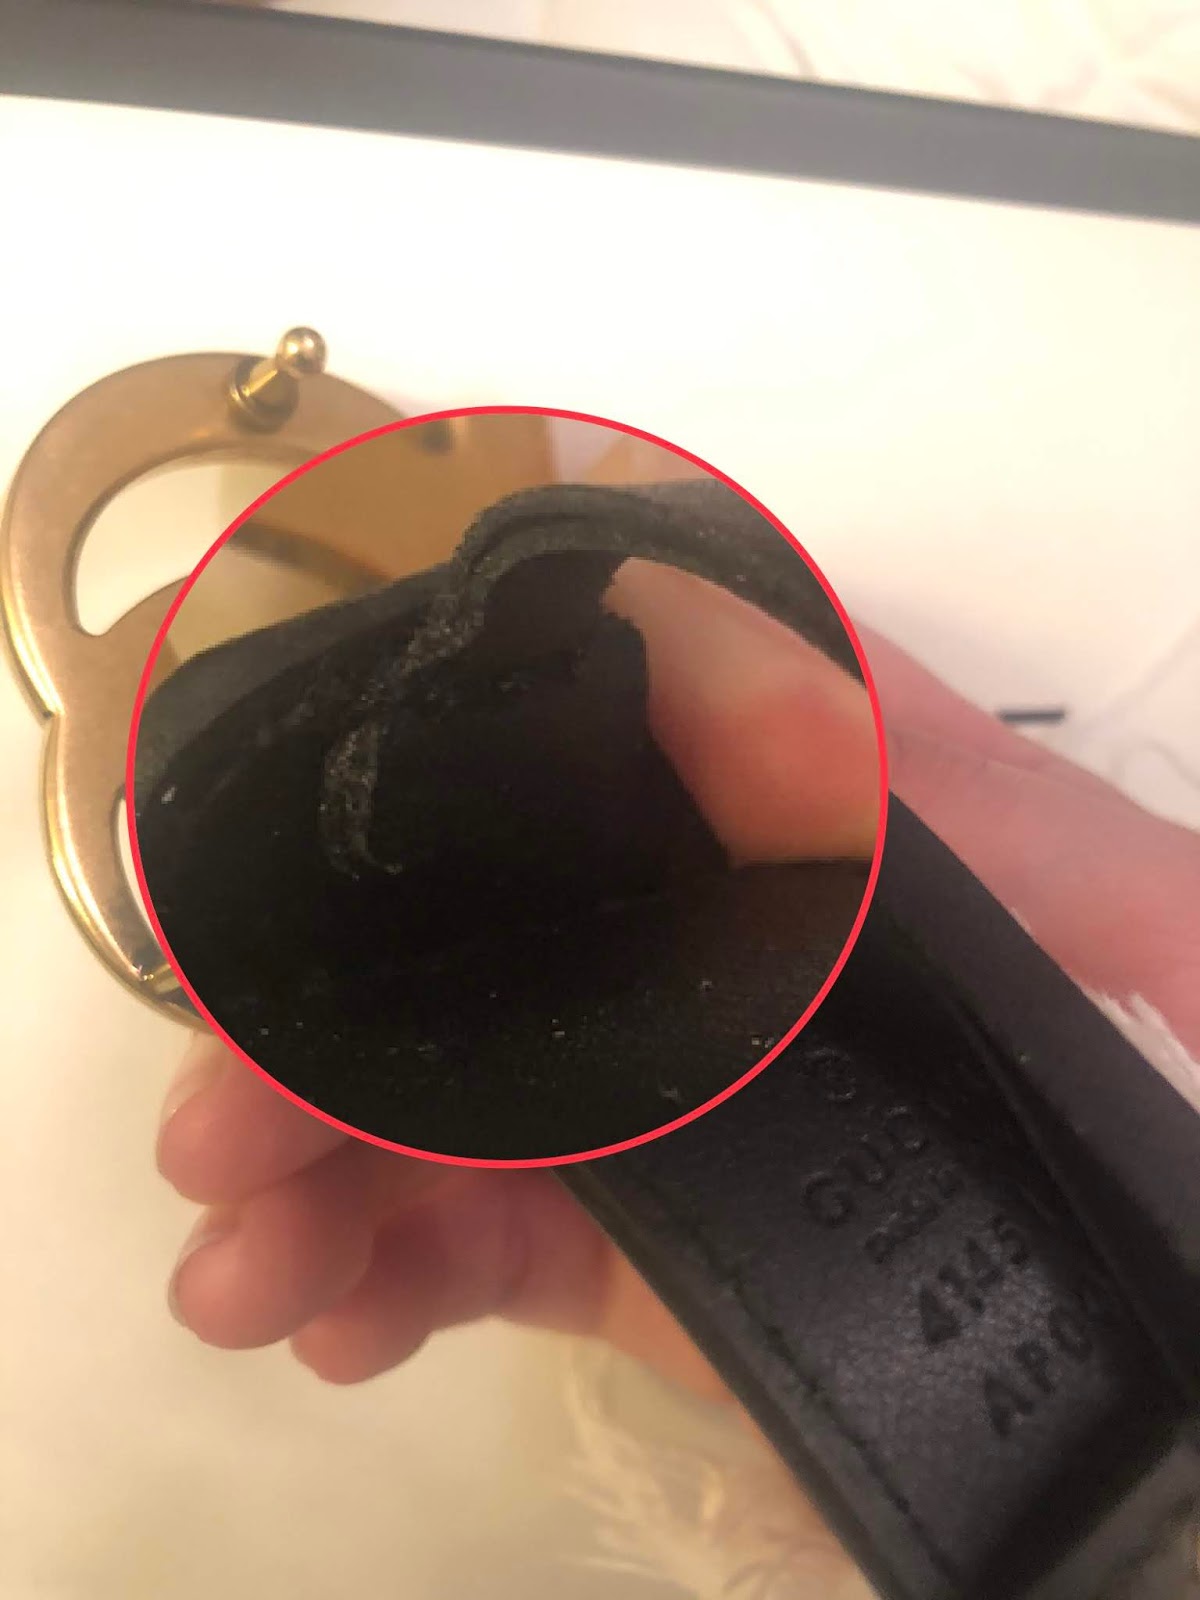 12 Ways To Tell if Your Gucci Belt is Fake - Her Closet Image